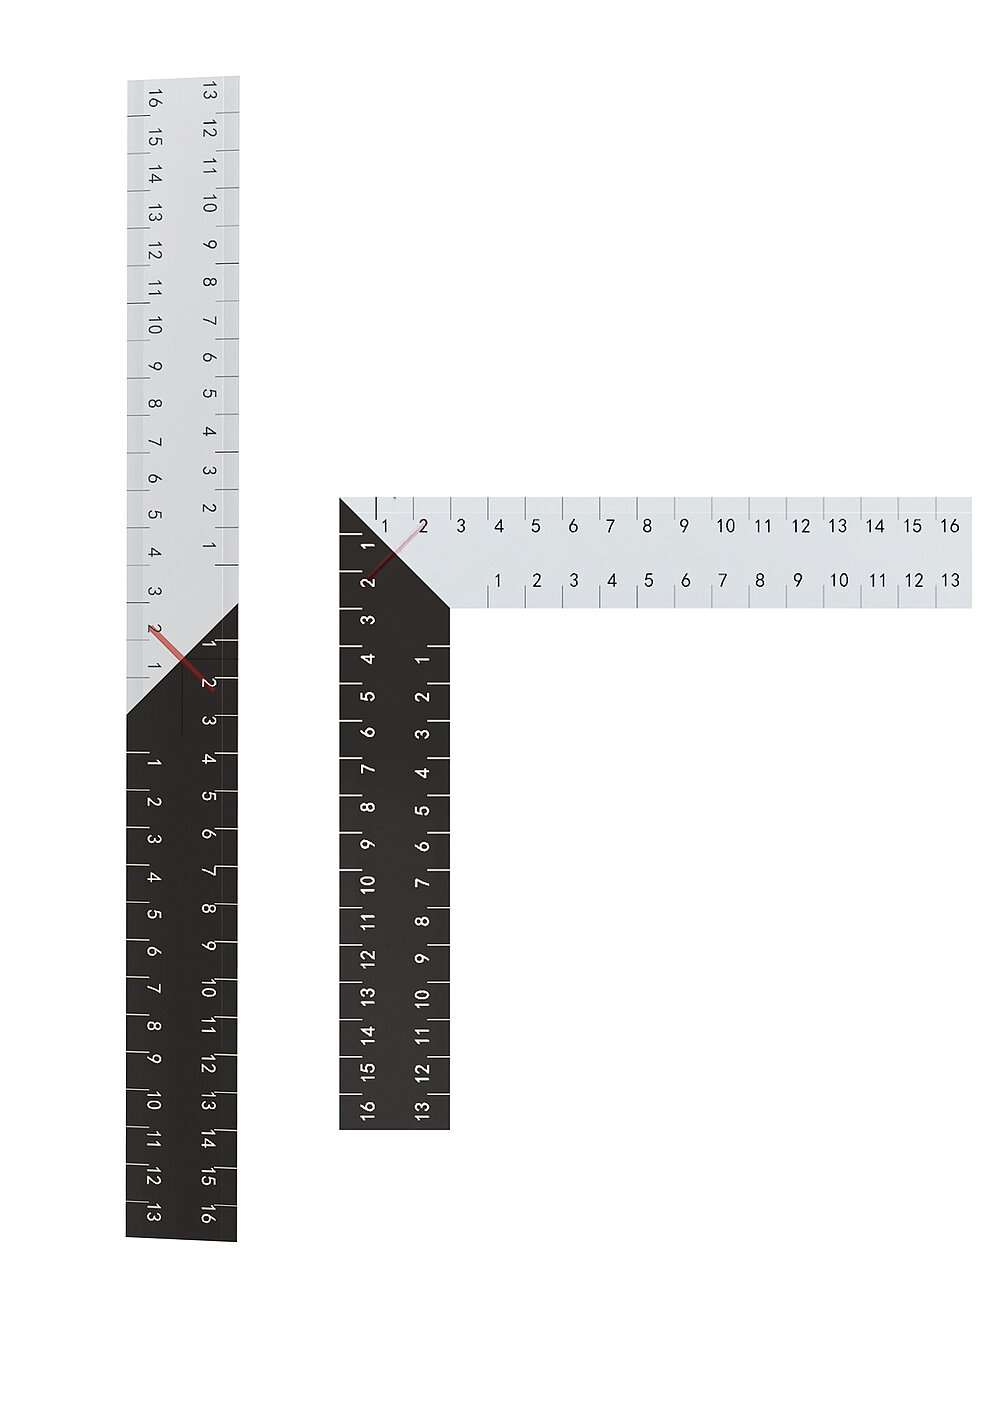 Red Dot Design Award: Into A Right Angle Ruler